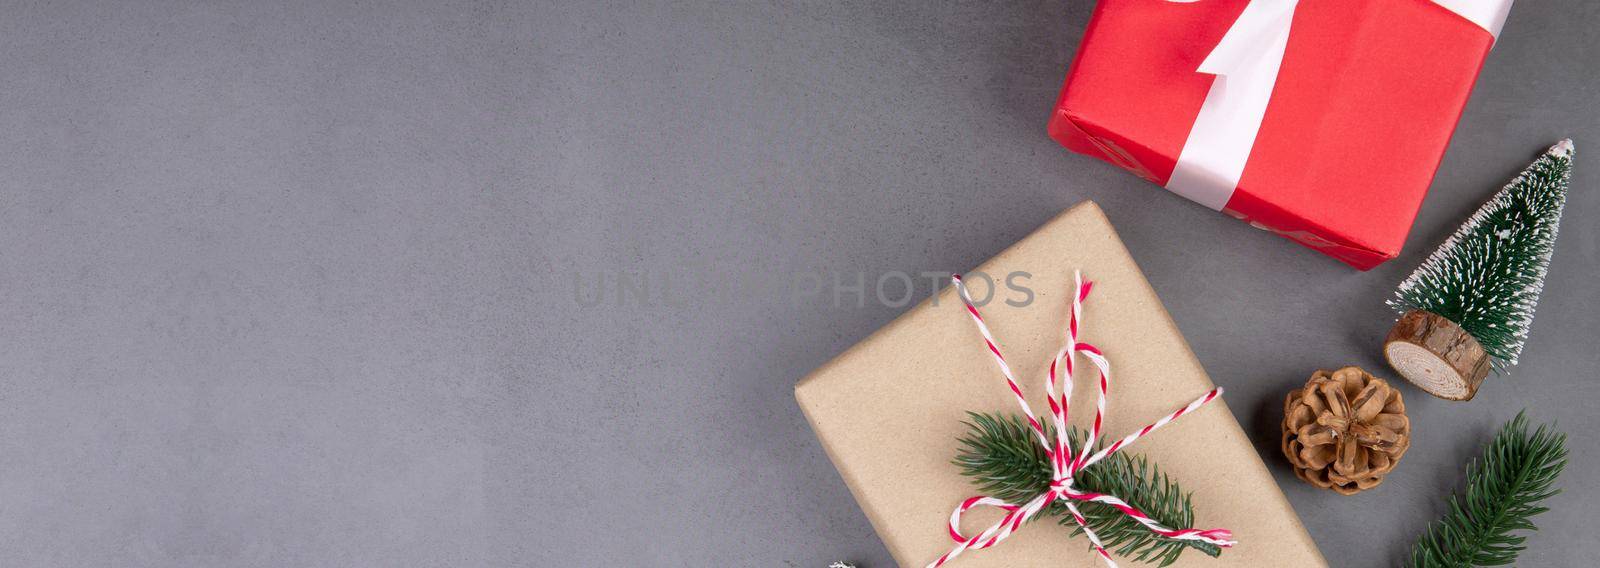 Christmas holiday composition with red gift box decoration on cement floor background, new year and xmas with presents on concrete in season, top view or flat lay, copy space, banner website.